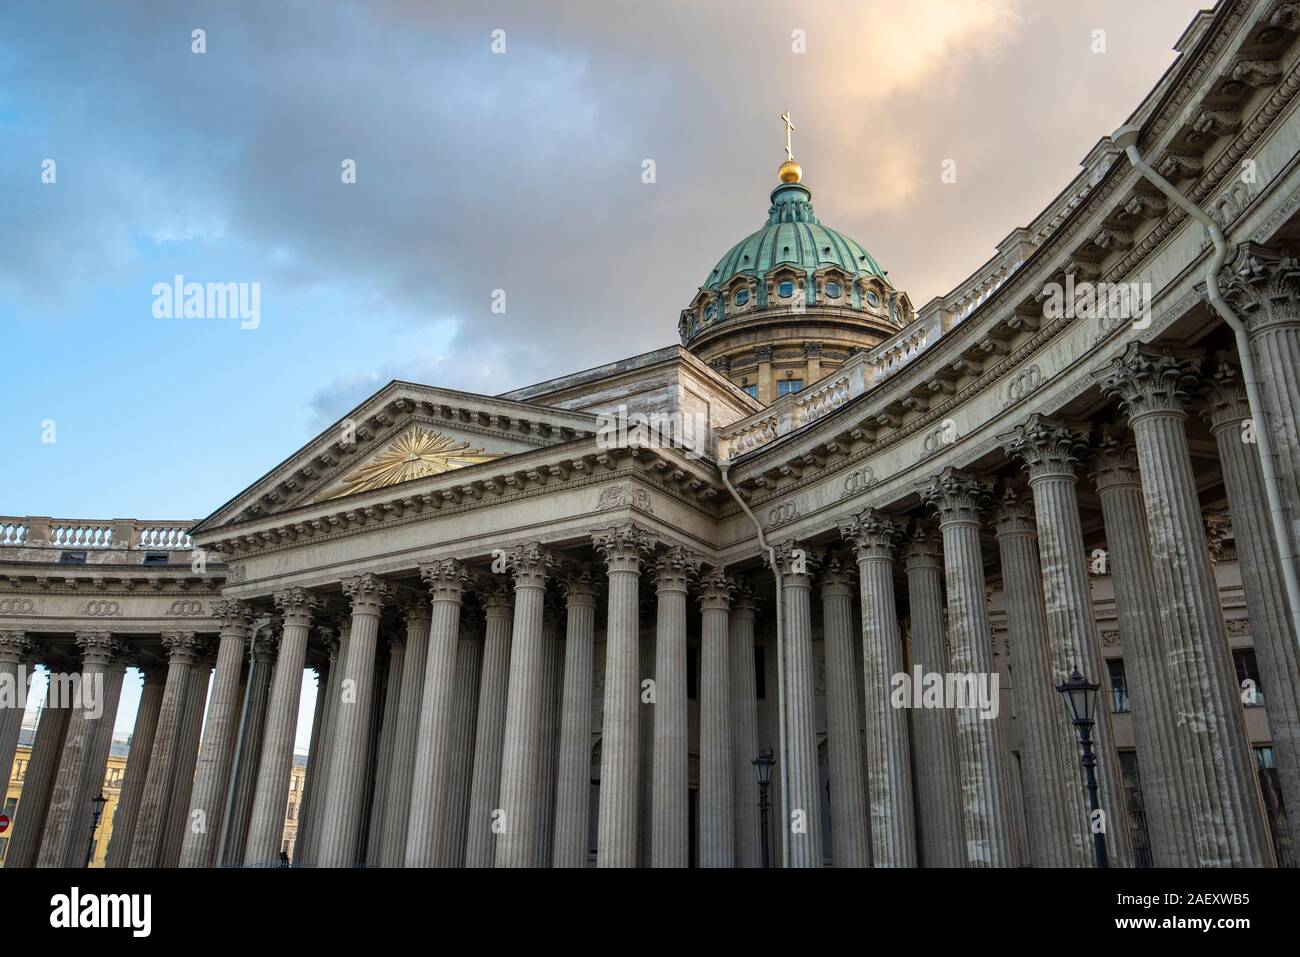 Kazan Cathedral or Kazanskiy Kafedralniy Sobor also known as the Cathedral of Our Lady of Kazan. Russian Orthodox Church in Saint Petersburg, Russia Stock Photo